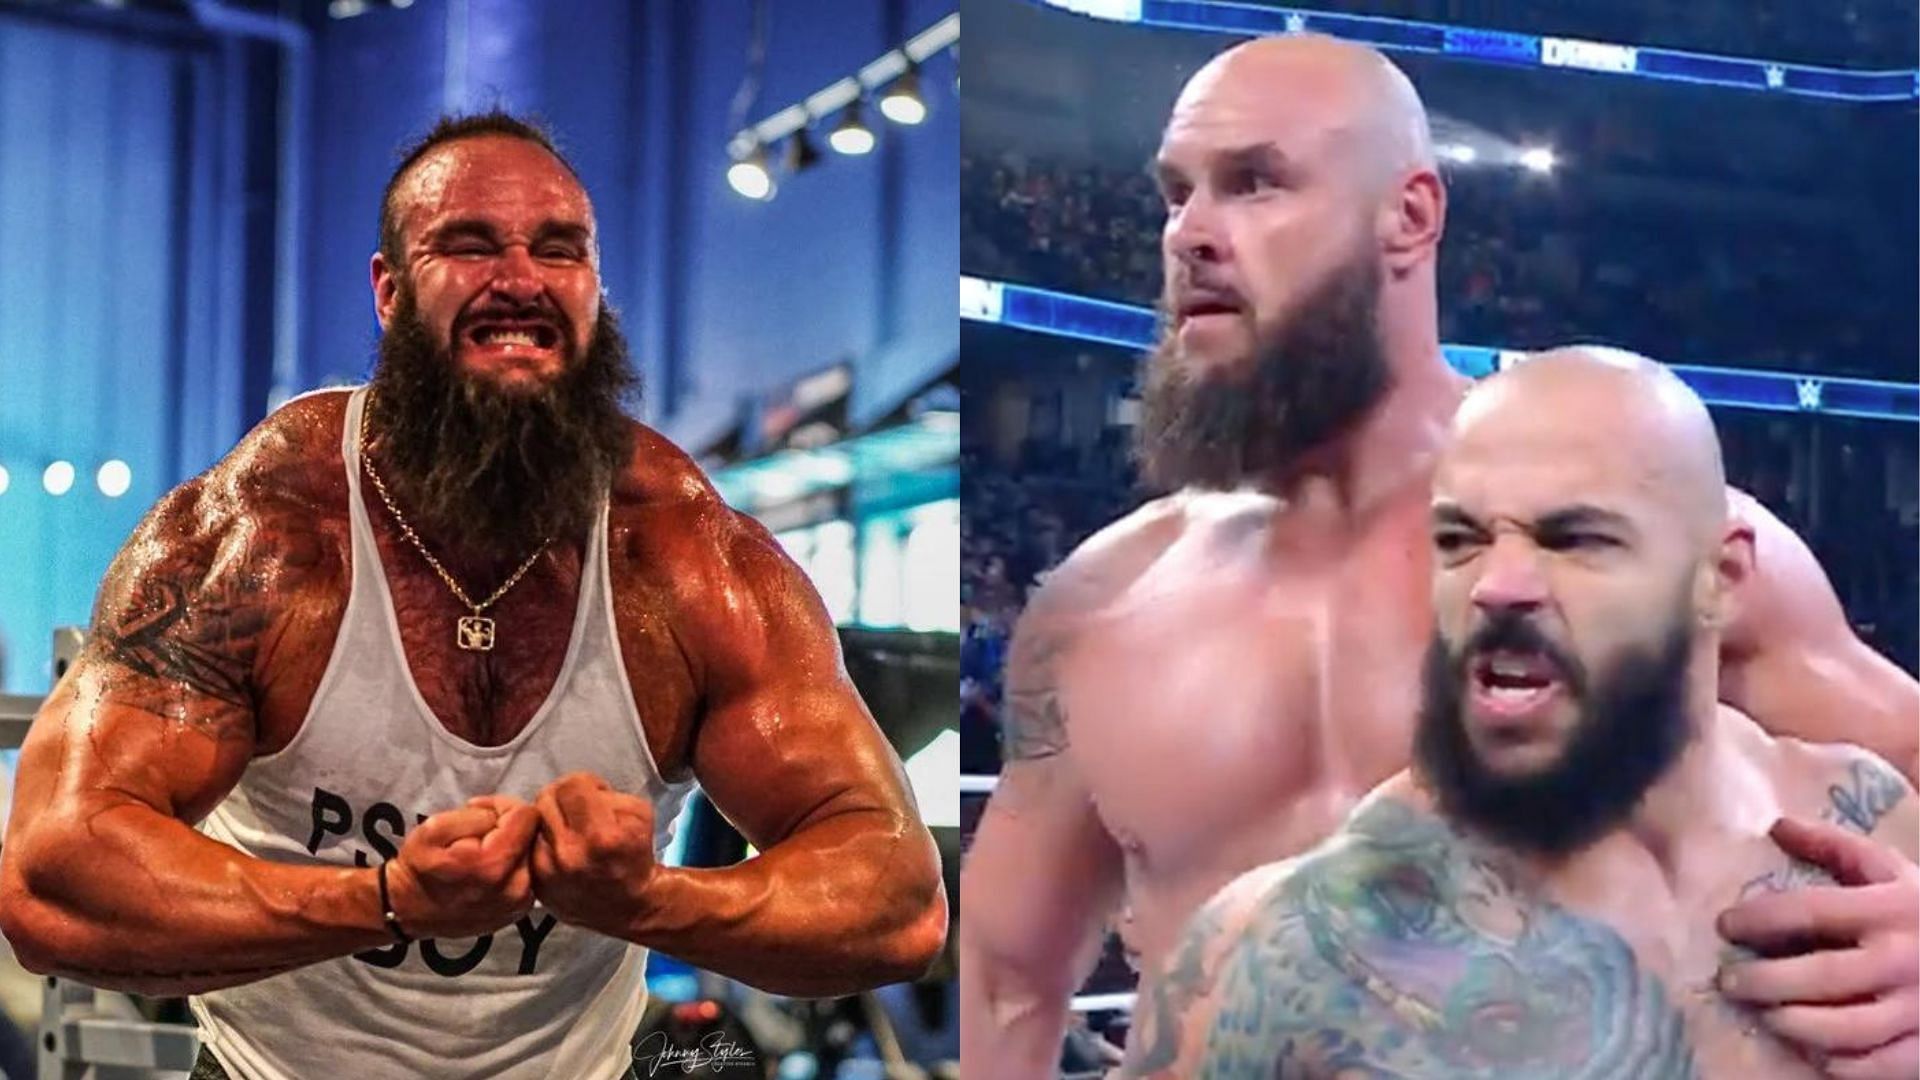 Braun Strowman is currently teaming up with Ricochet